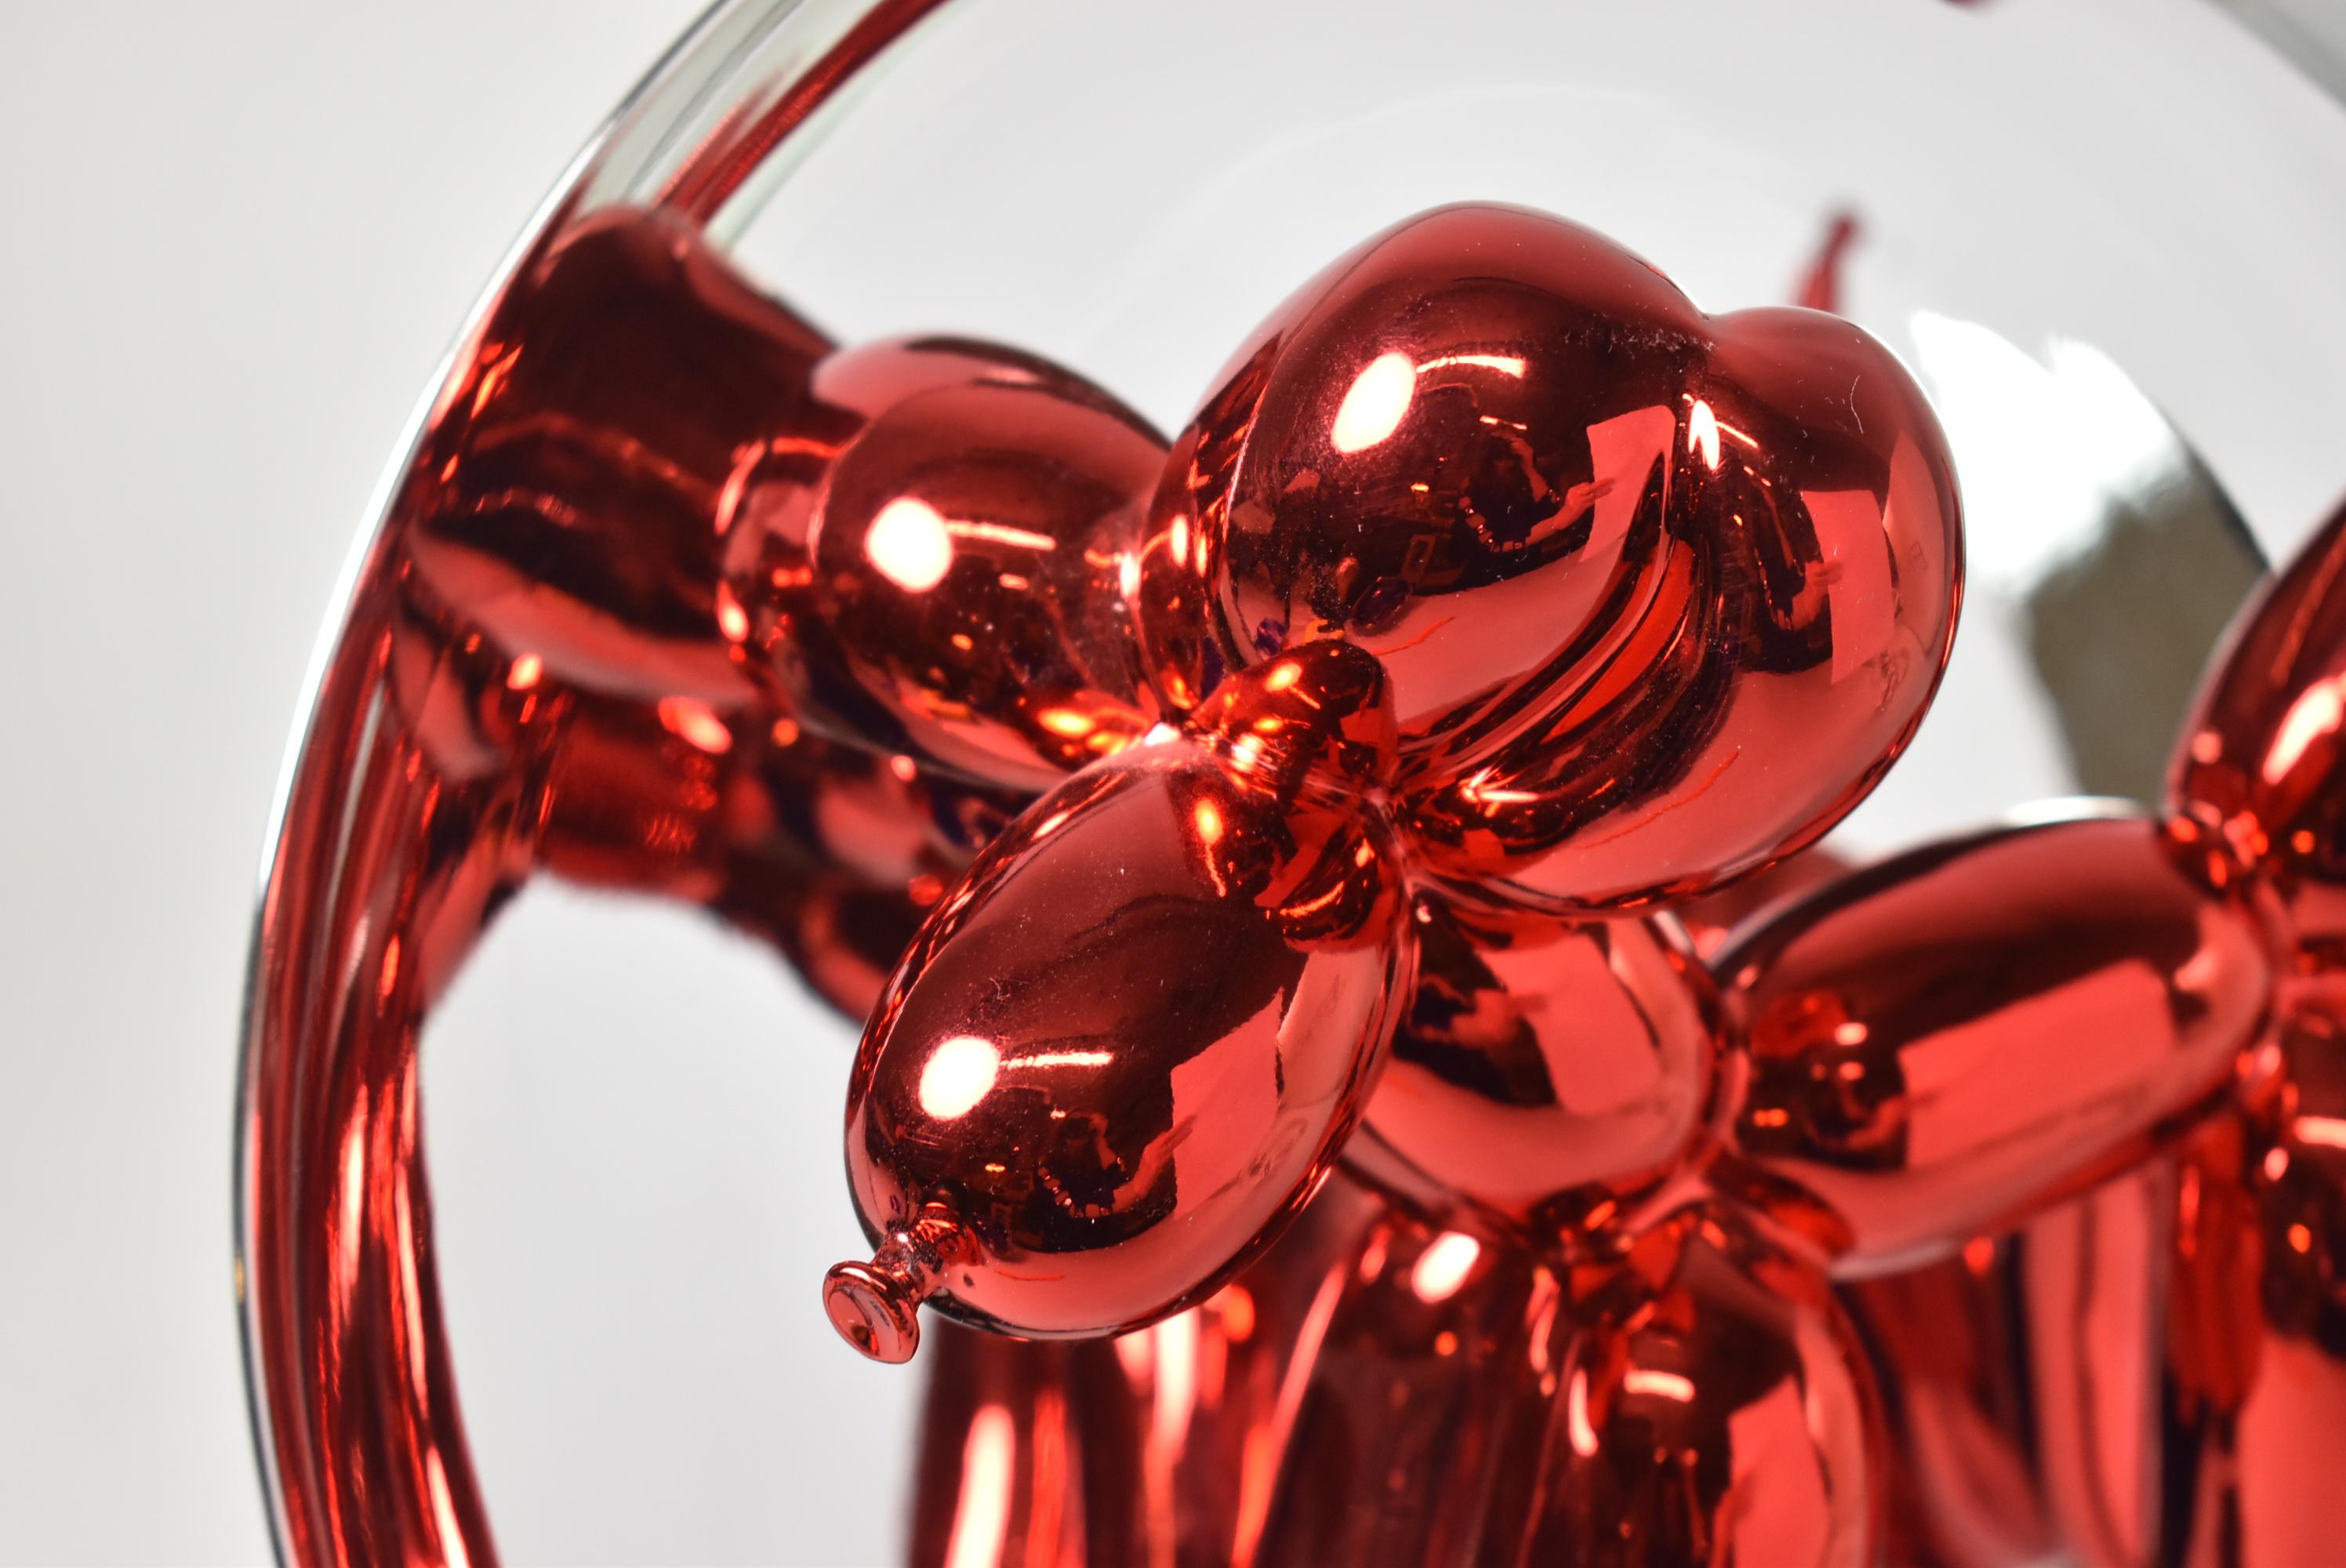 Jeff Koons pop art sculpture Red Balloon Dog, number 1645/2300, 1995. Chromed back plate with a porcelain red balloon dog, label on the back. The plate is 10 1/2